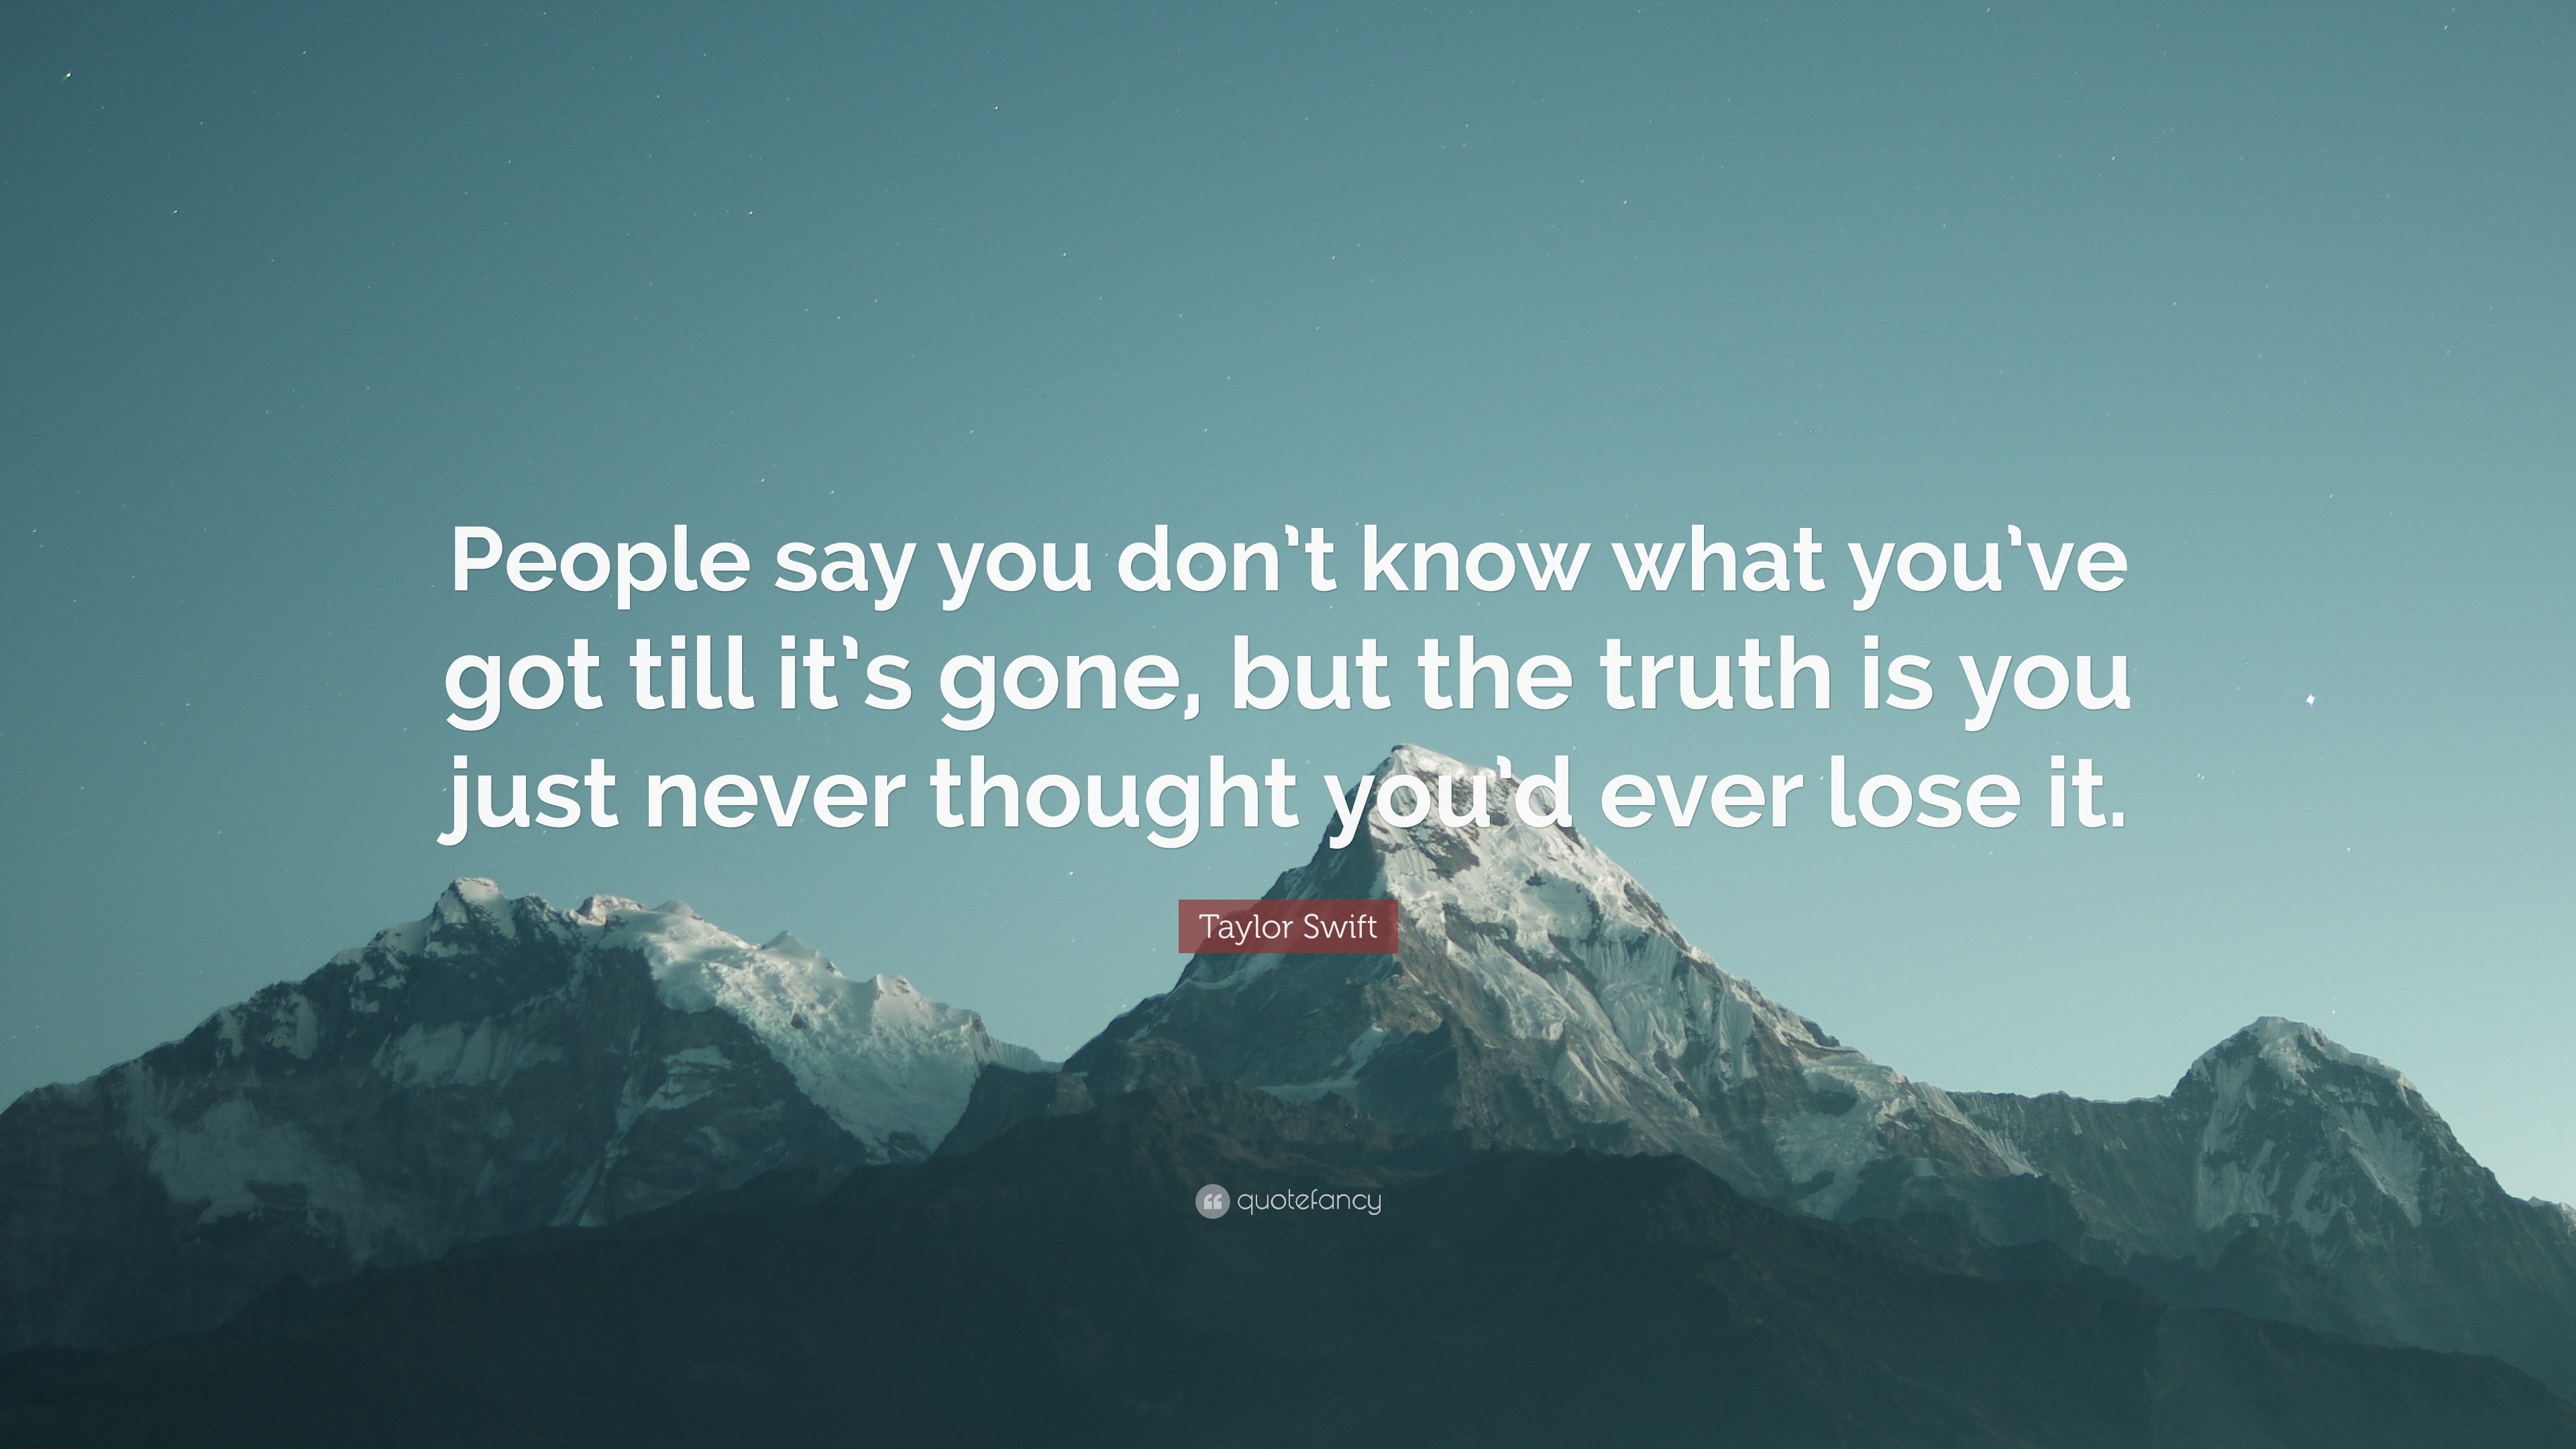 Taylor Swift Quote: “People say you don't know what you've got till it's  gone